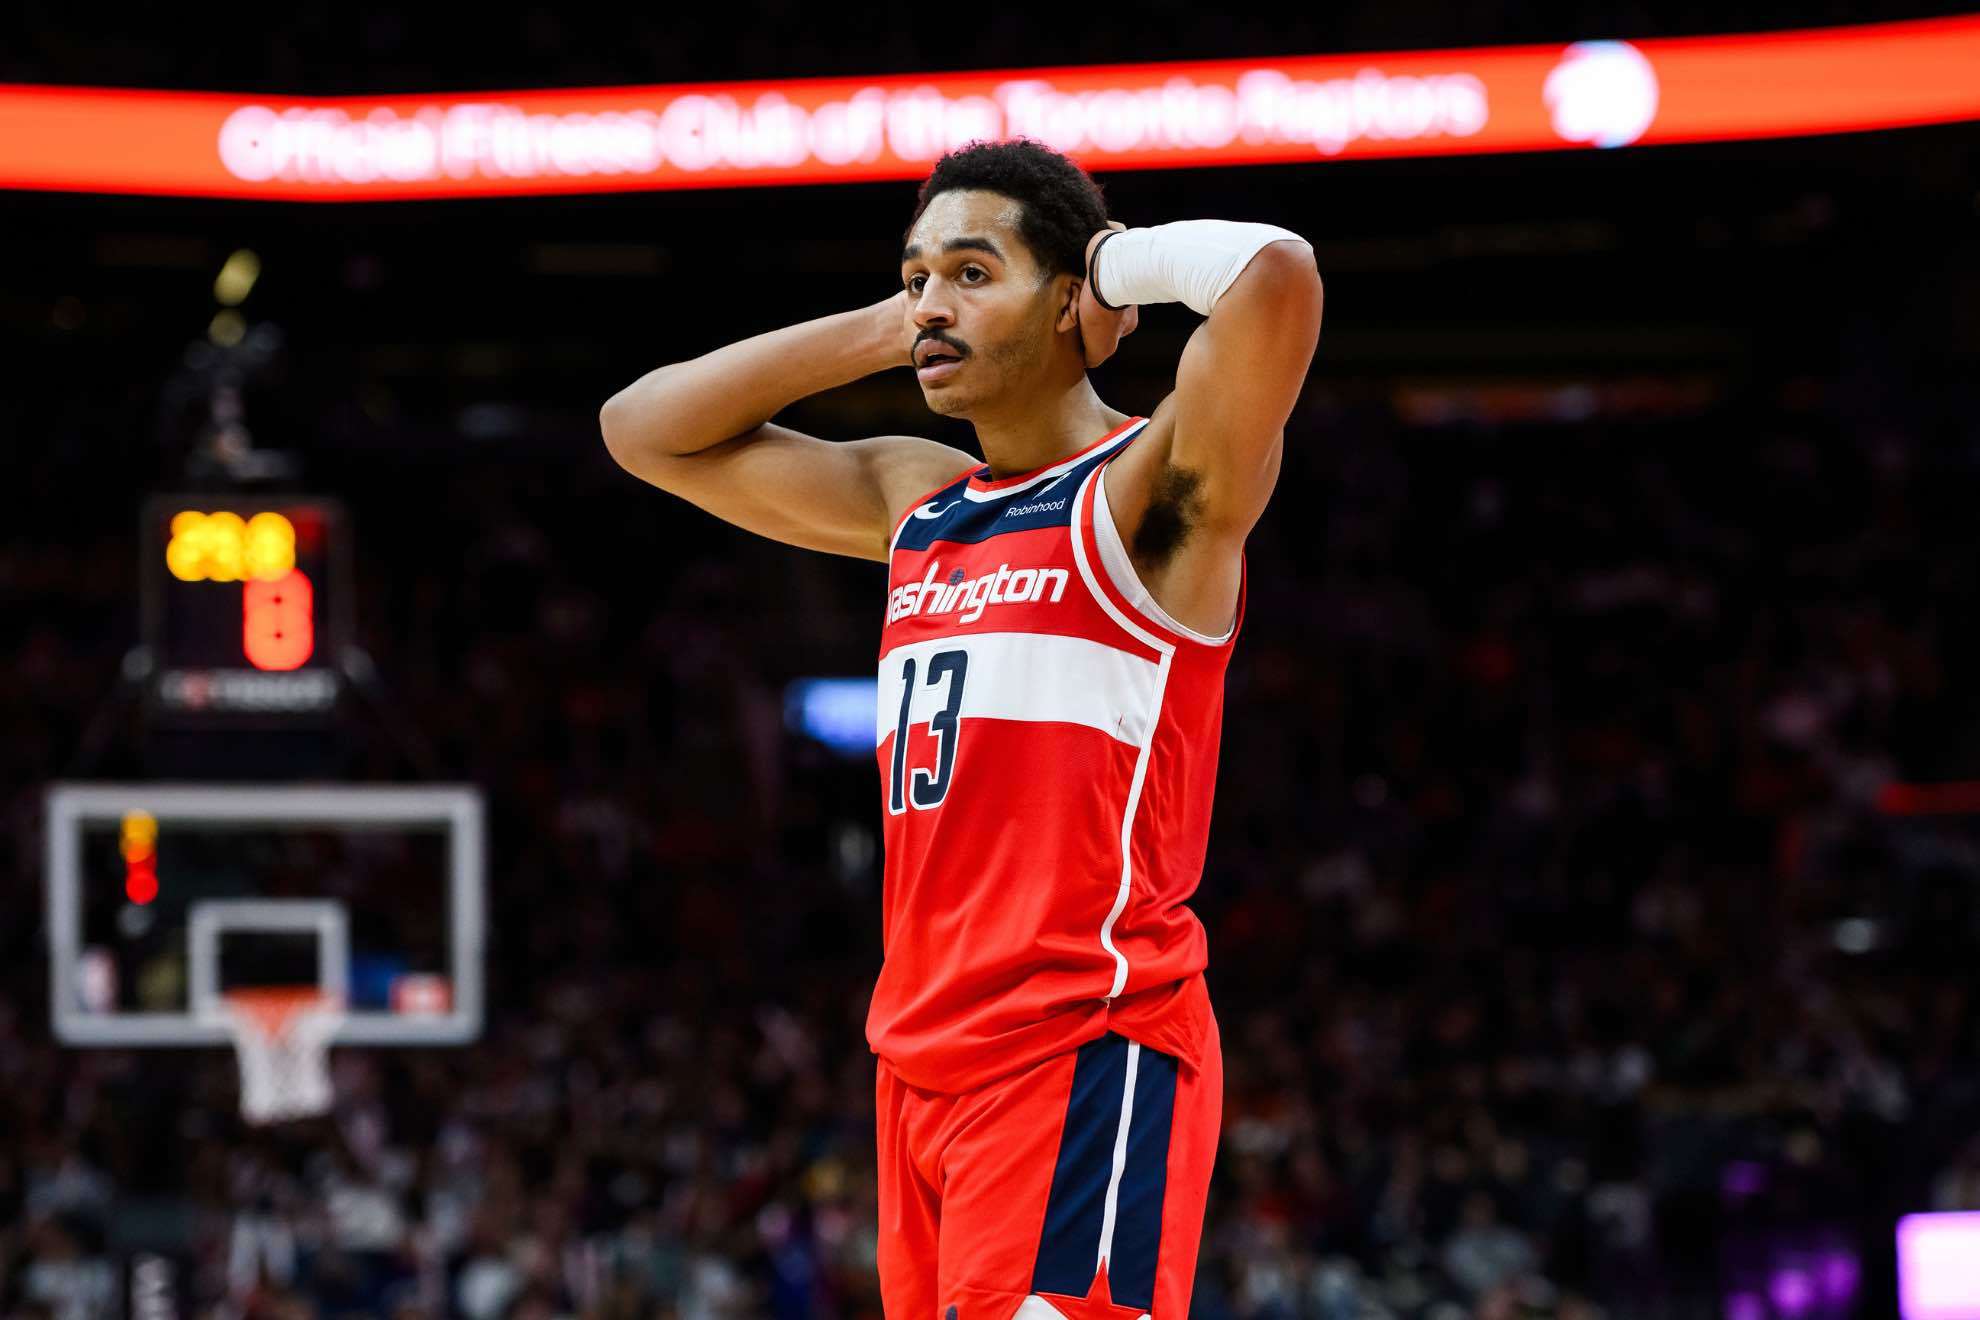 Jordan Poole embarrasses the Wizards again: he let the clock run while losing in the 4th quarter